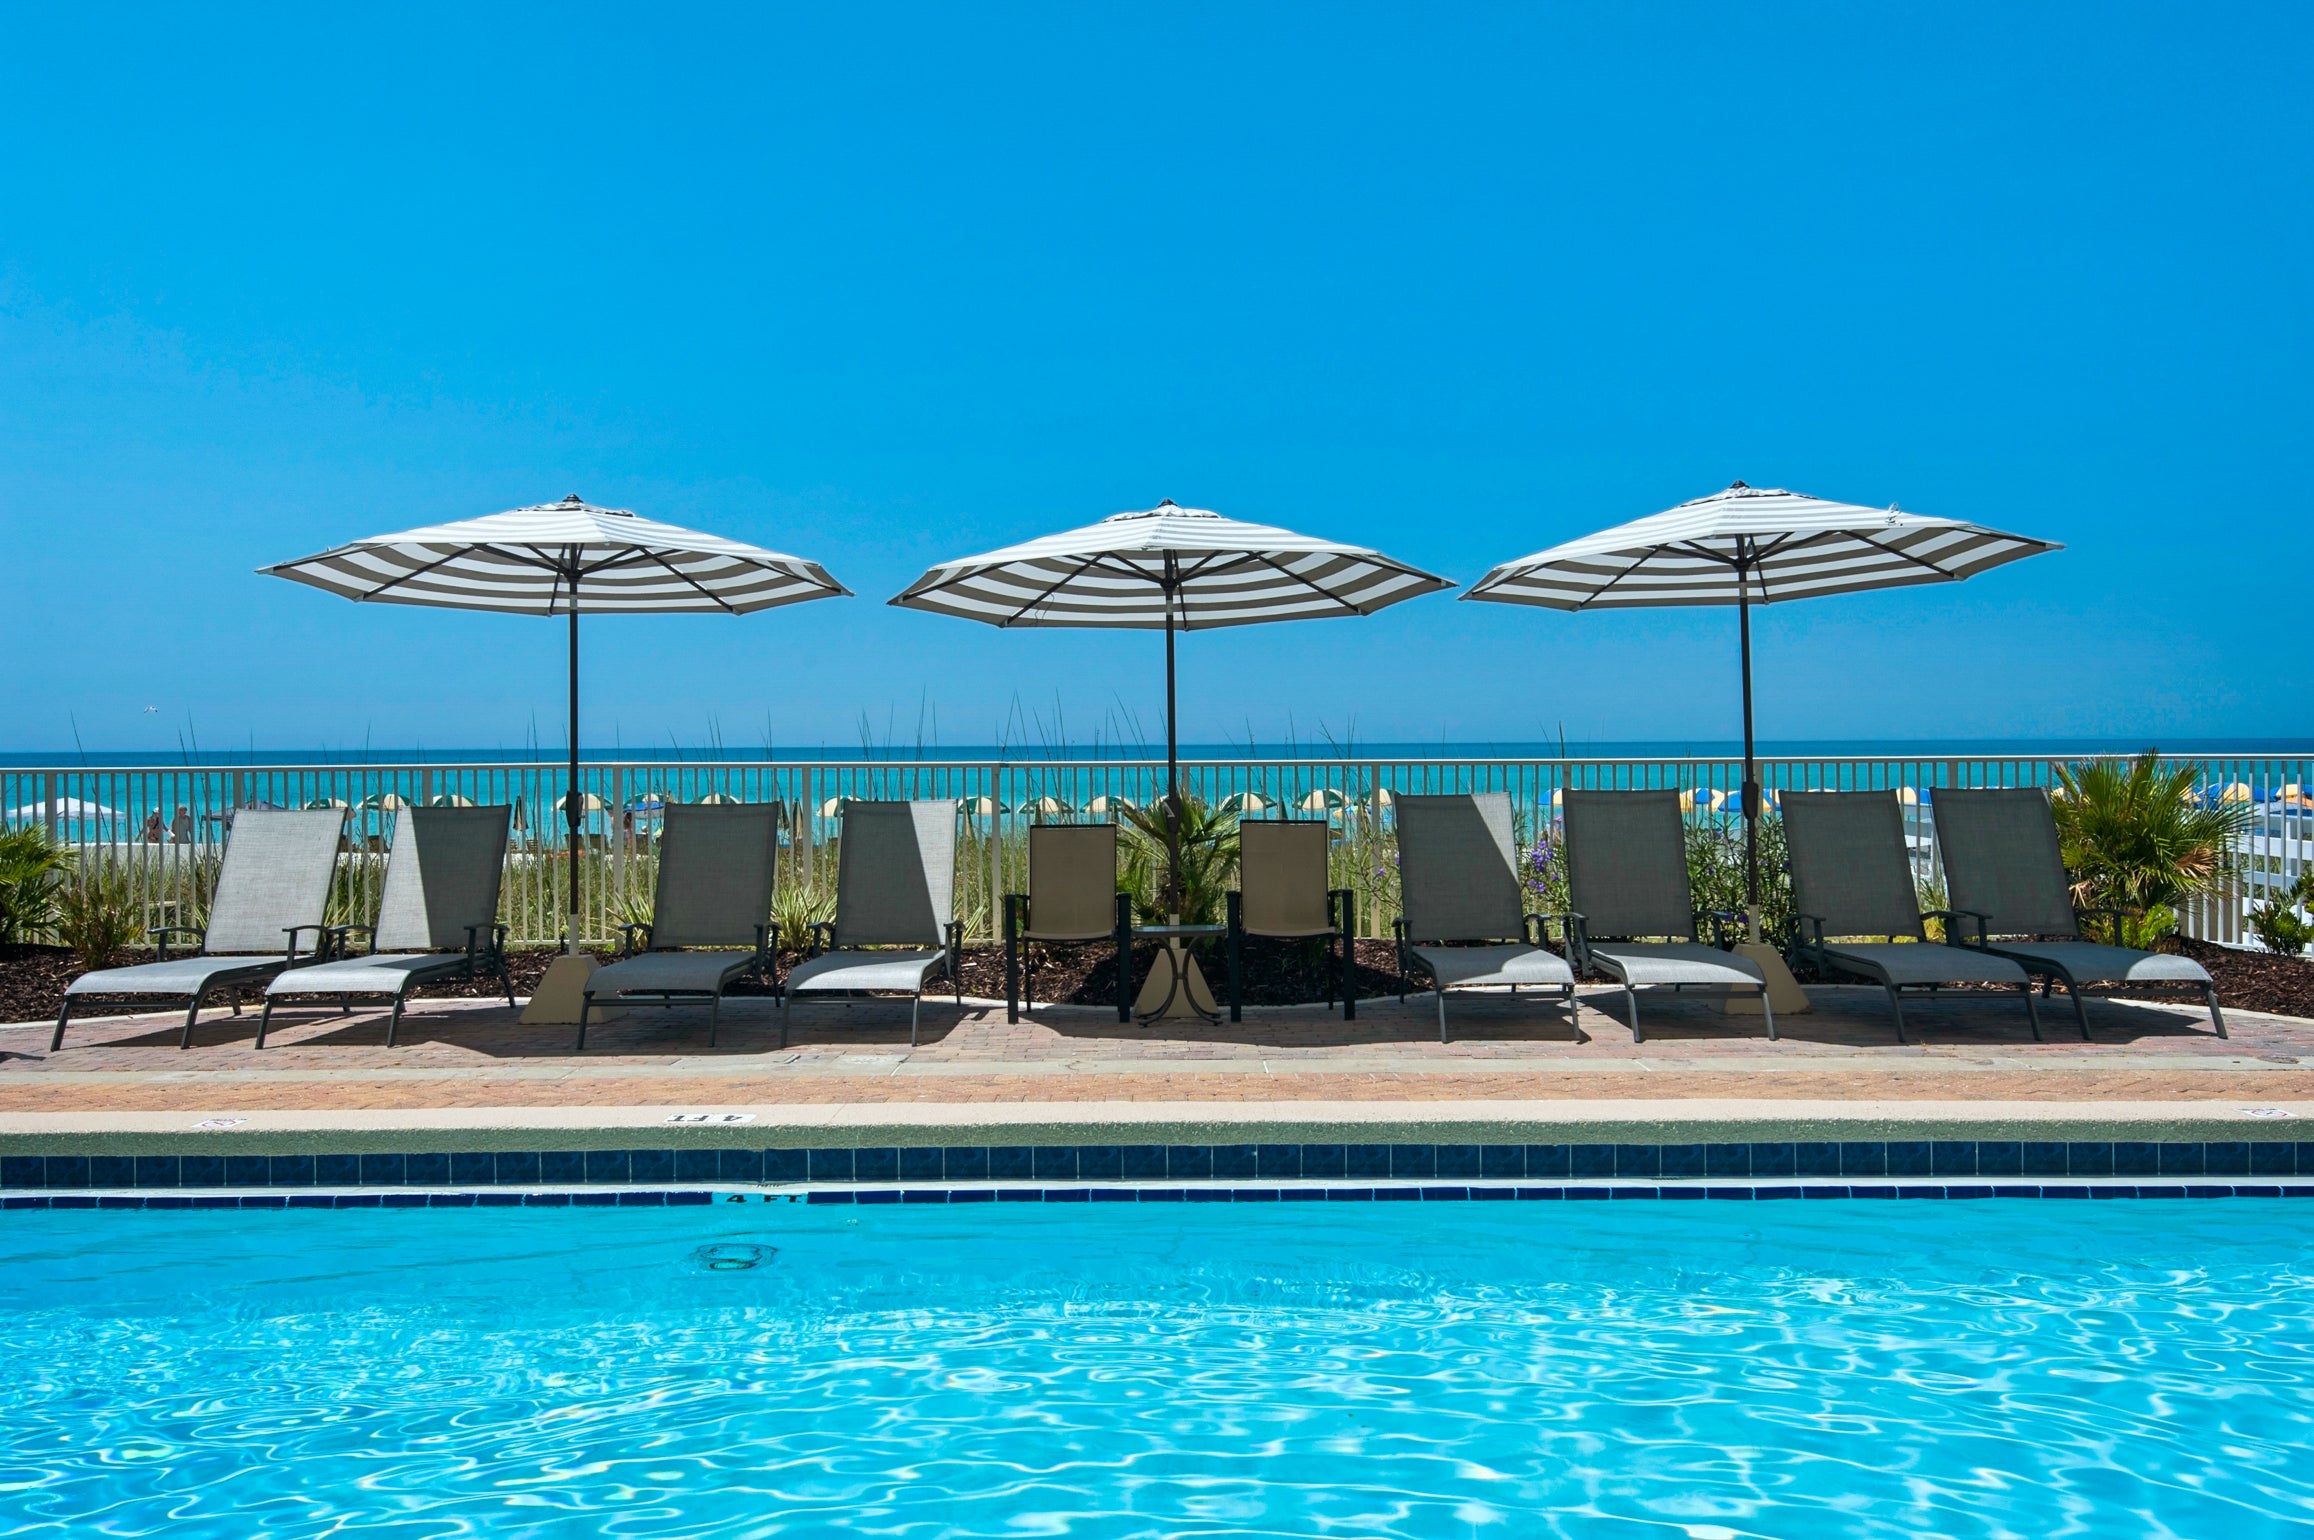 Relax by the pool and enjoy the gulf views